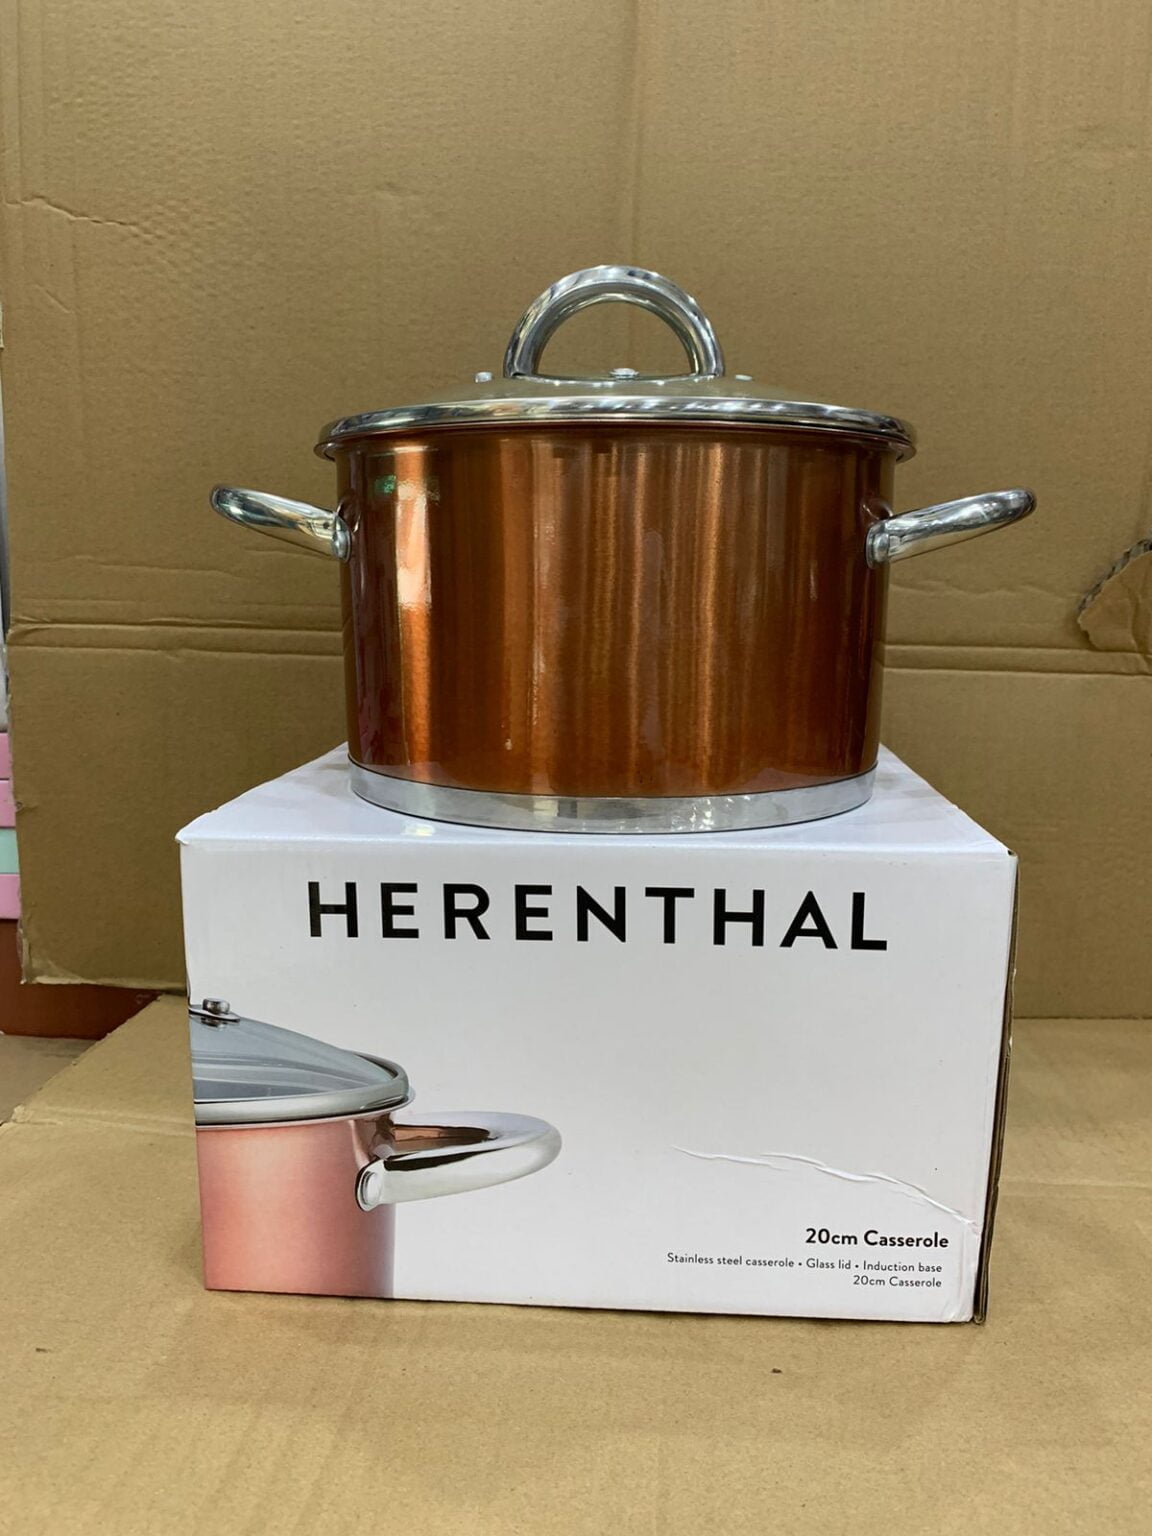 HERENTHAL Stainless Steel 20cm Casserole Pot with Glass lids